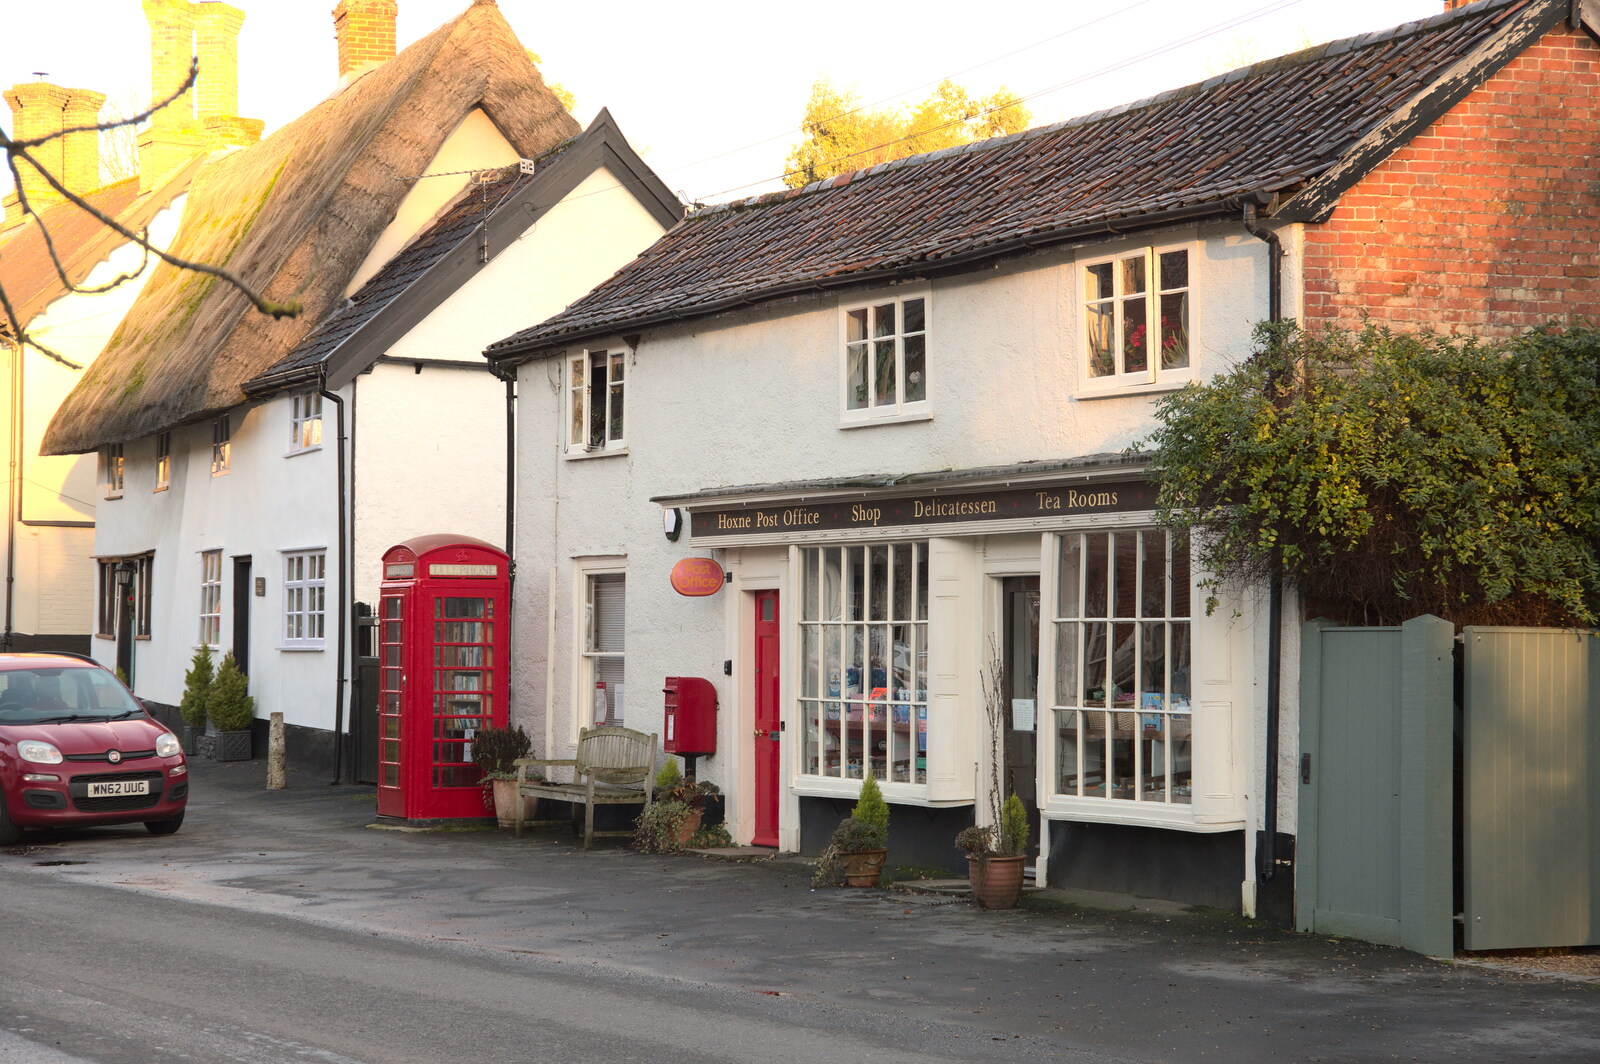 Winter Walks around Brome and Hoxne, Suffolk - 2nd January 2023: Hoxne deli and post office